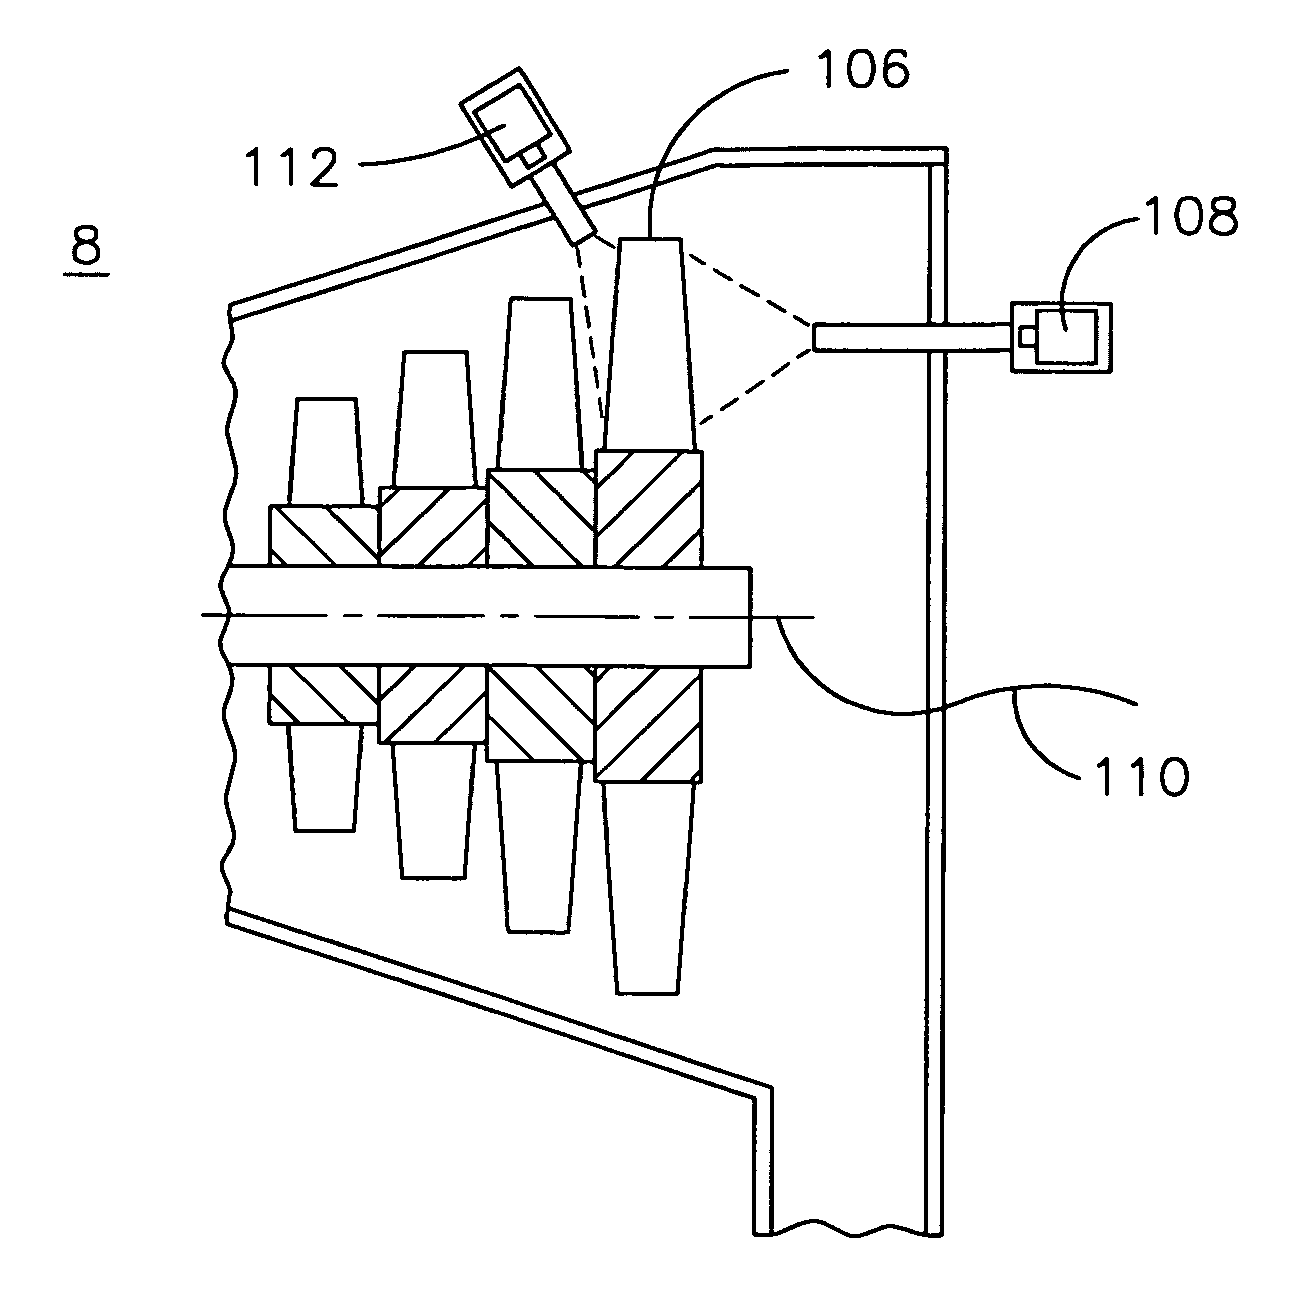 Infrared-based method and apparatus for online detection of cracks in steam turbine components